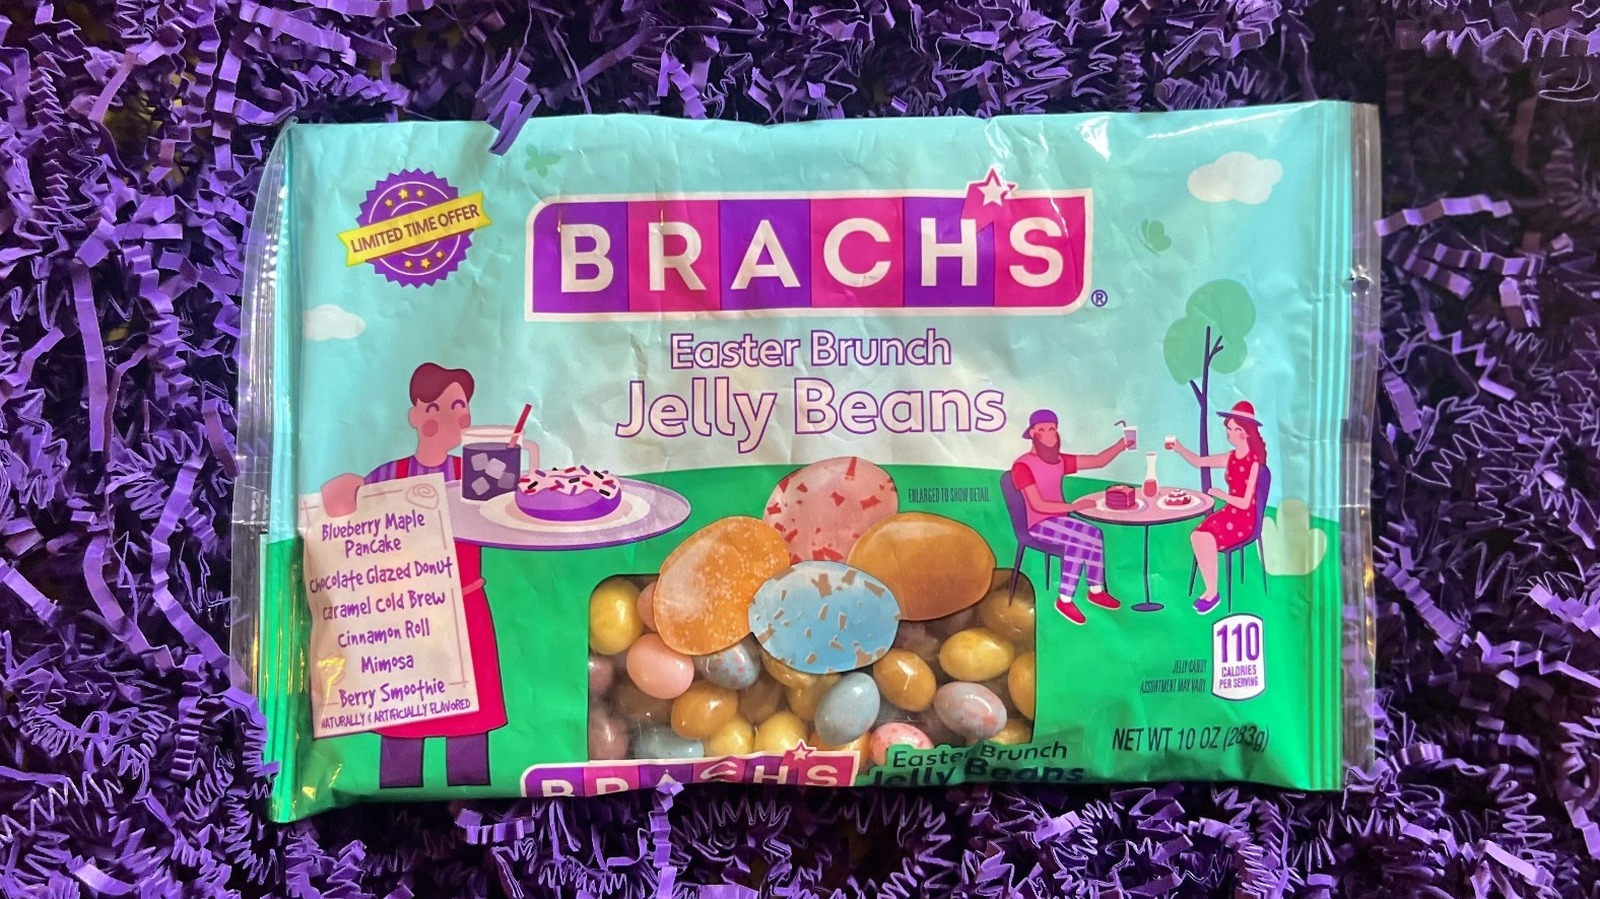 https://www.thedailymeal.com/img/gallery/we-tasted-and-ranked-brachs-new-easter-brunch-jelly-beans/l-intro-1708974312.jpg